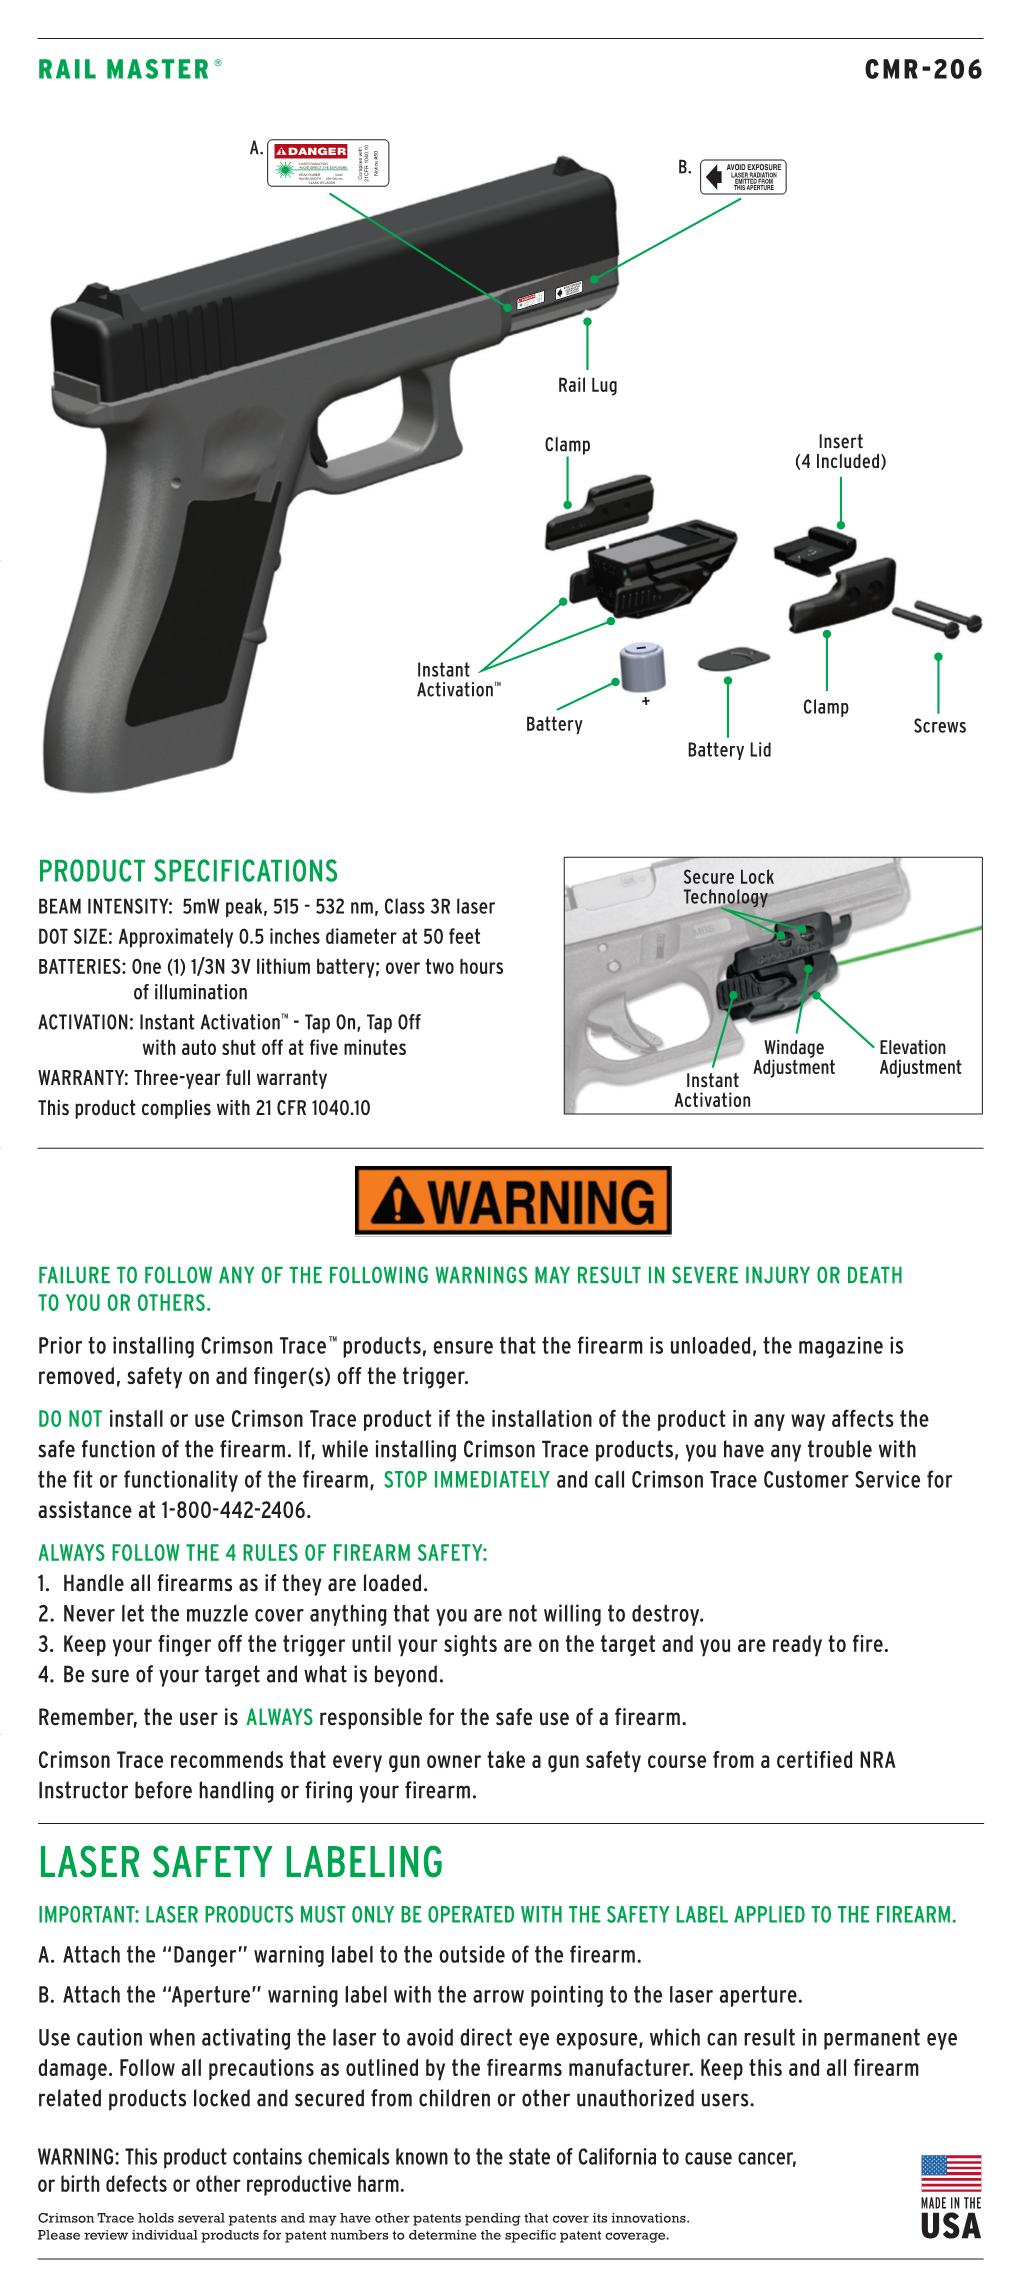 Laser Safety Labeling Important: Laser Products Must Only Be Operated with the Safety Label Applied to the Firearm